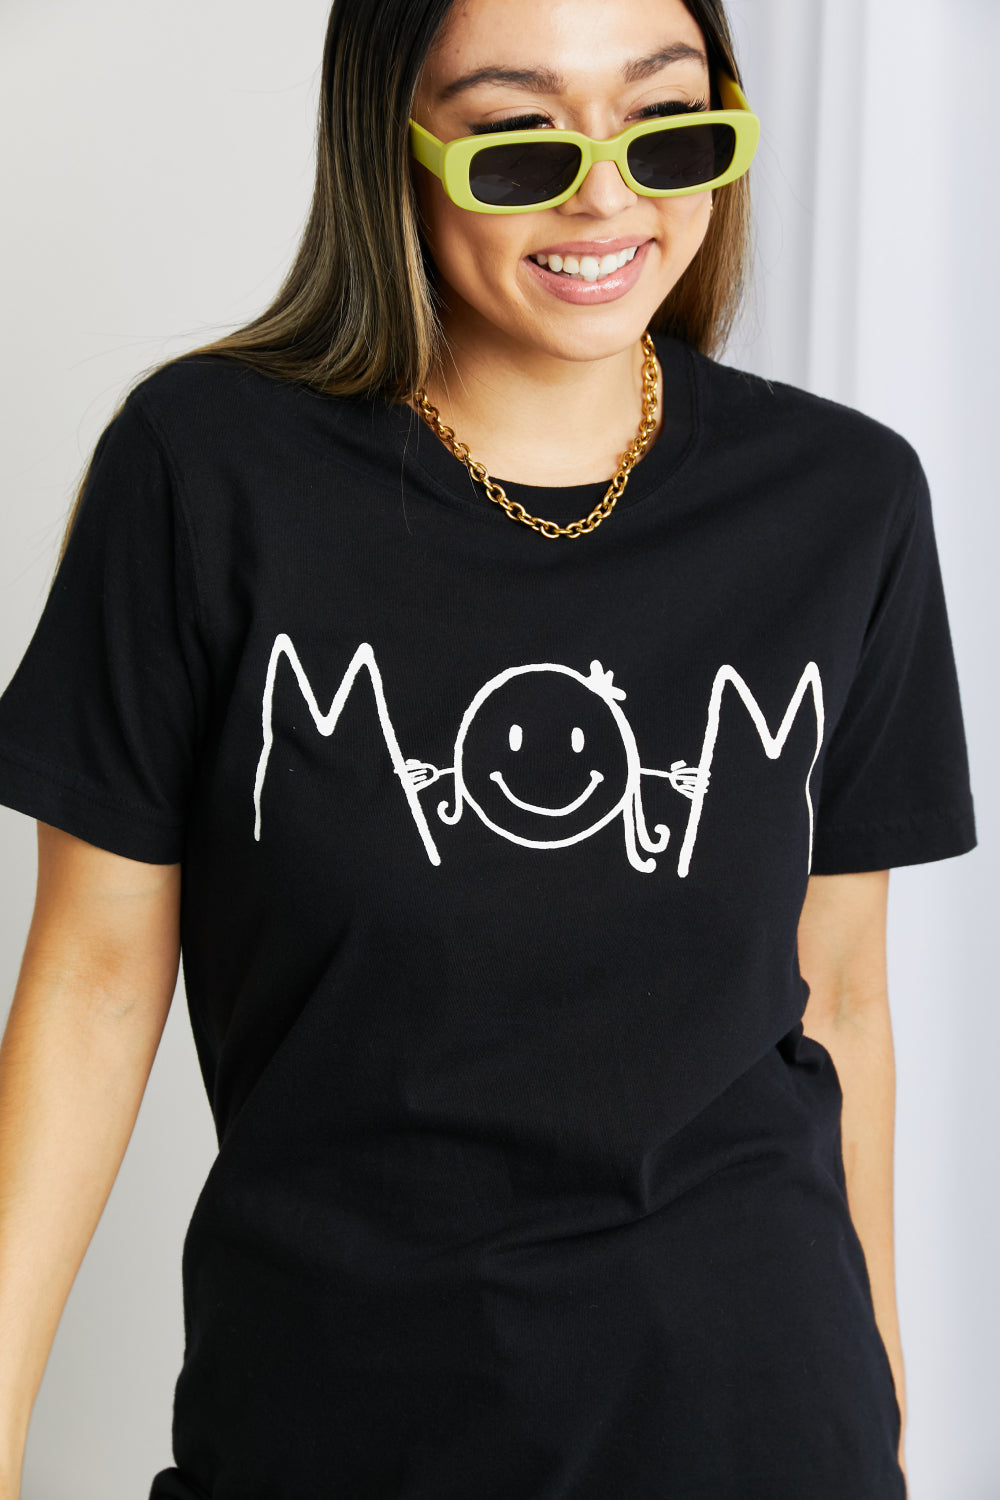 mineB Full Size Smiley Face Graphic Tee | Tees - CHANELIA